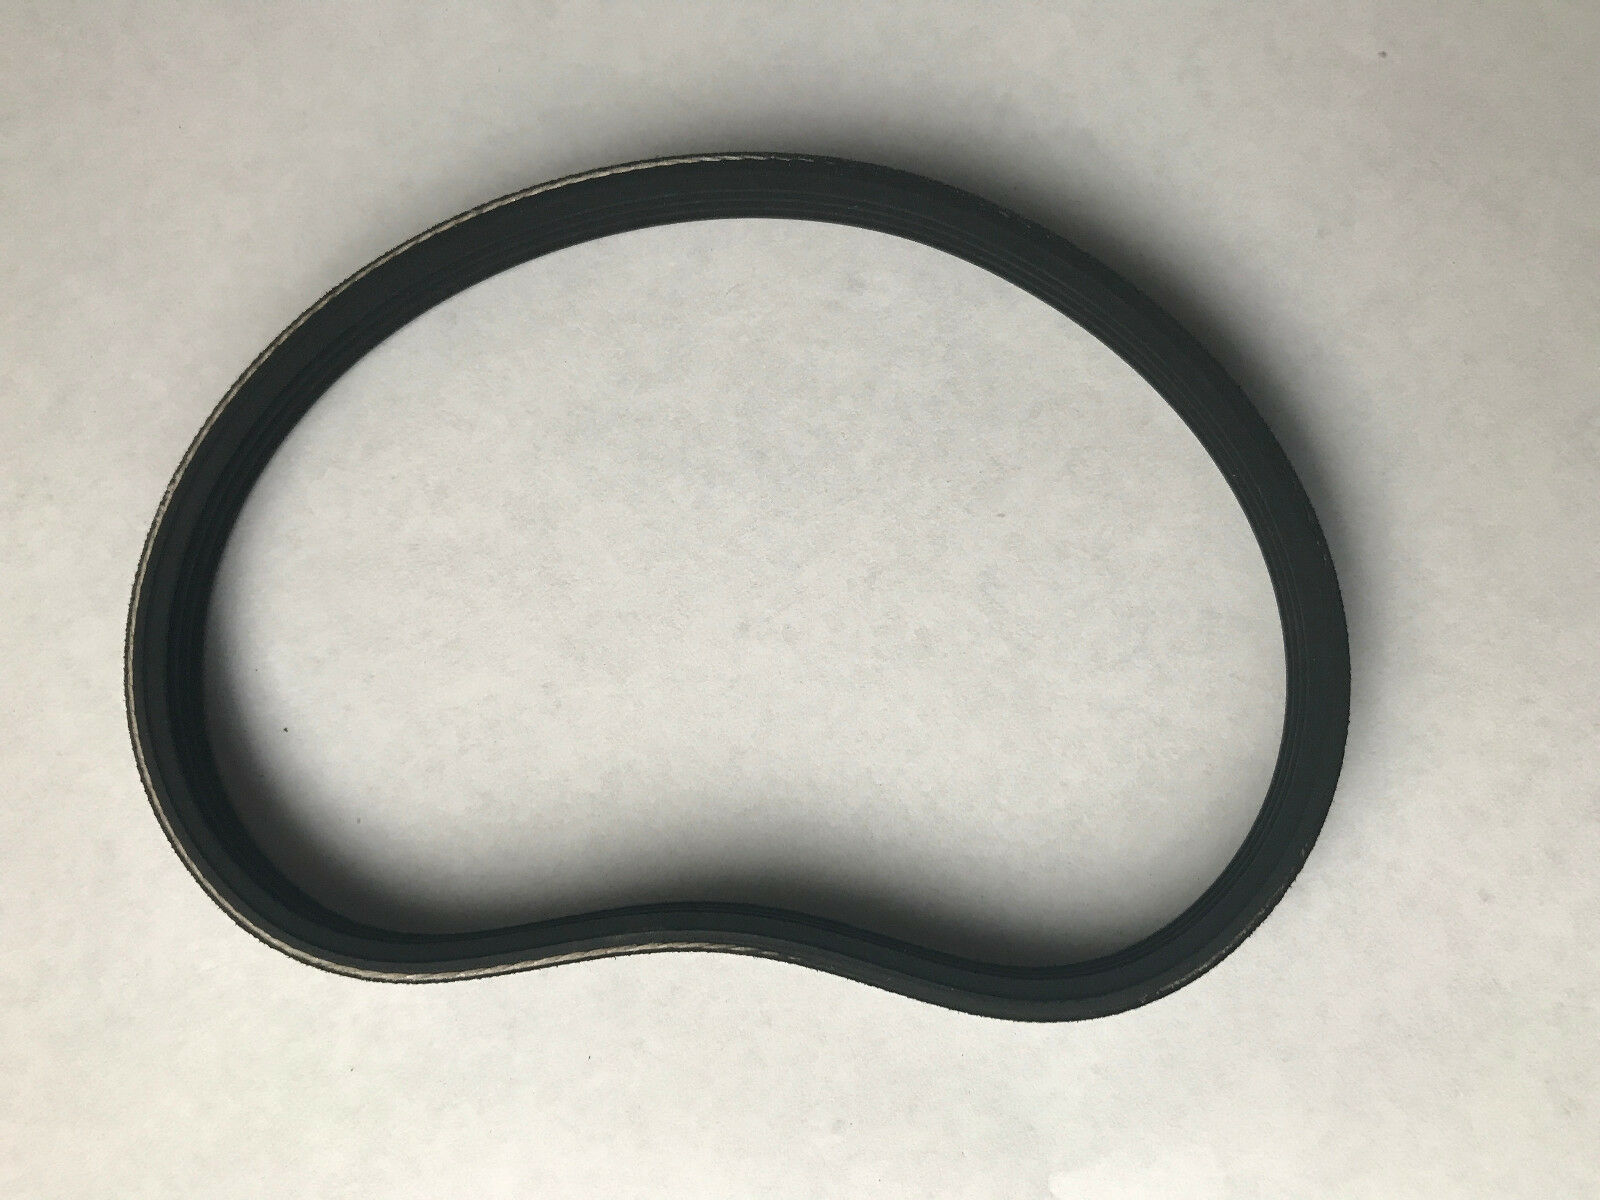 Primary image for *New Replacement BELT* for use with Shun Ling Meat Slicer OEM# 381126